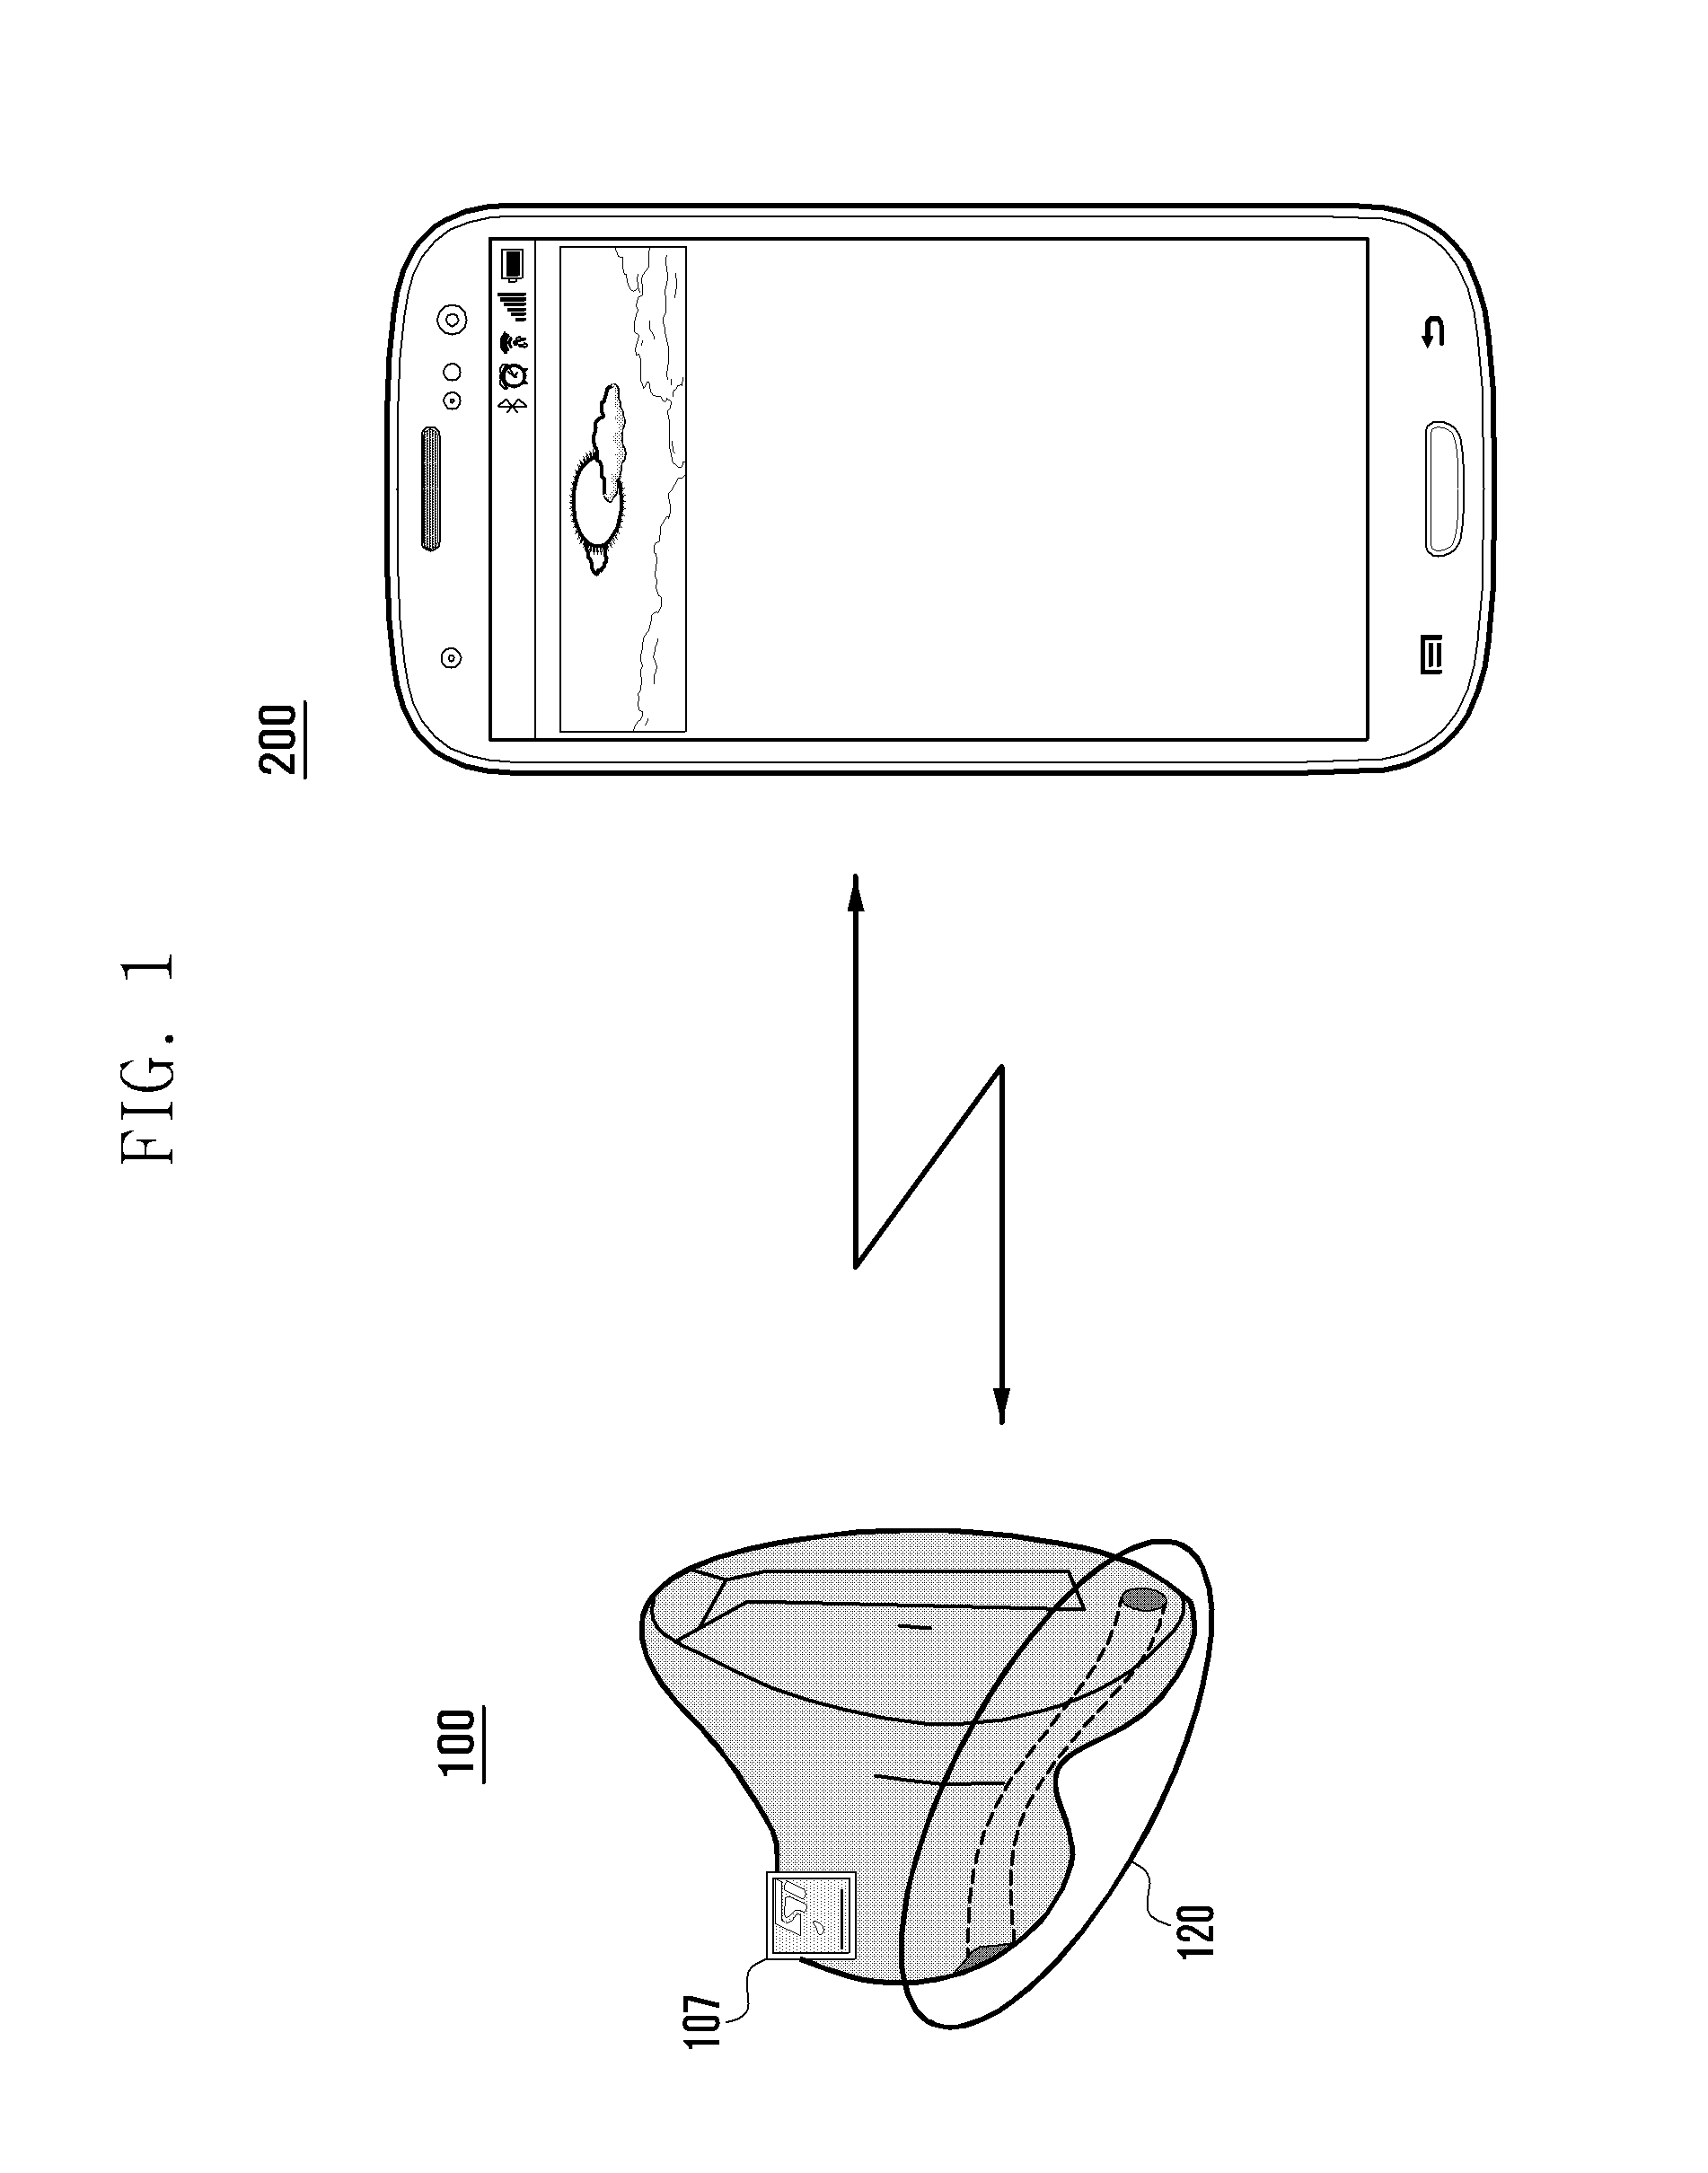 Method and apparatus for adjusting air pressure inside the ear of a person wearing an ear-wearable device